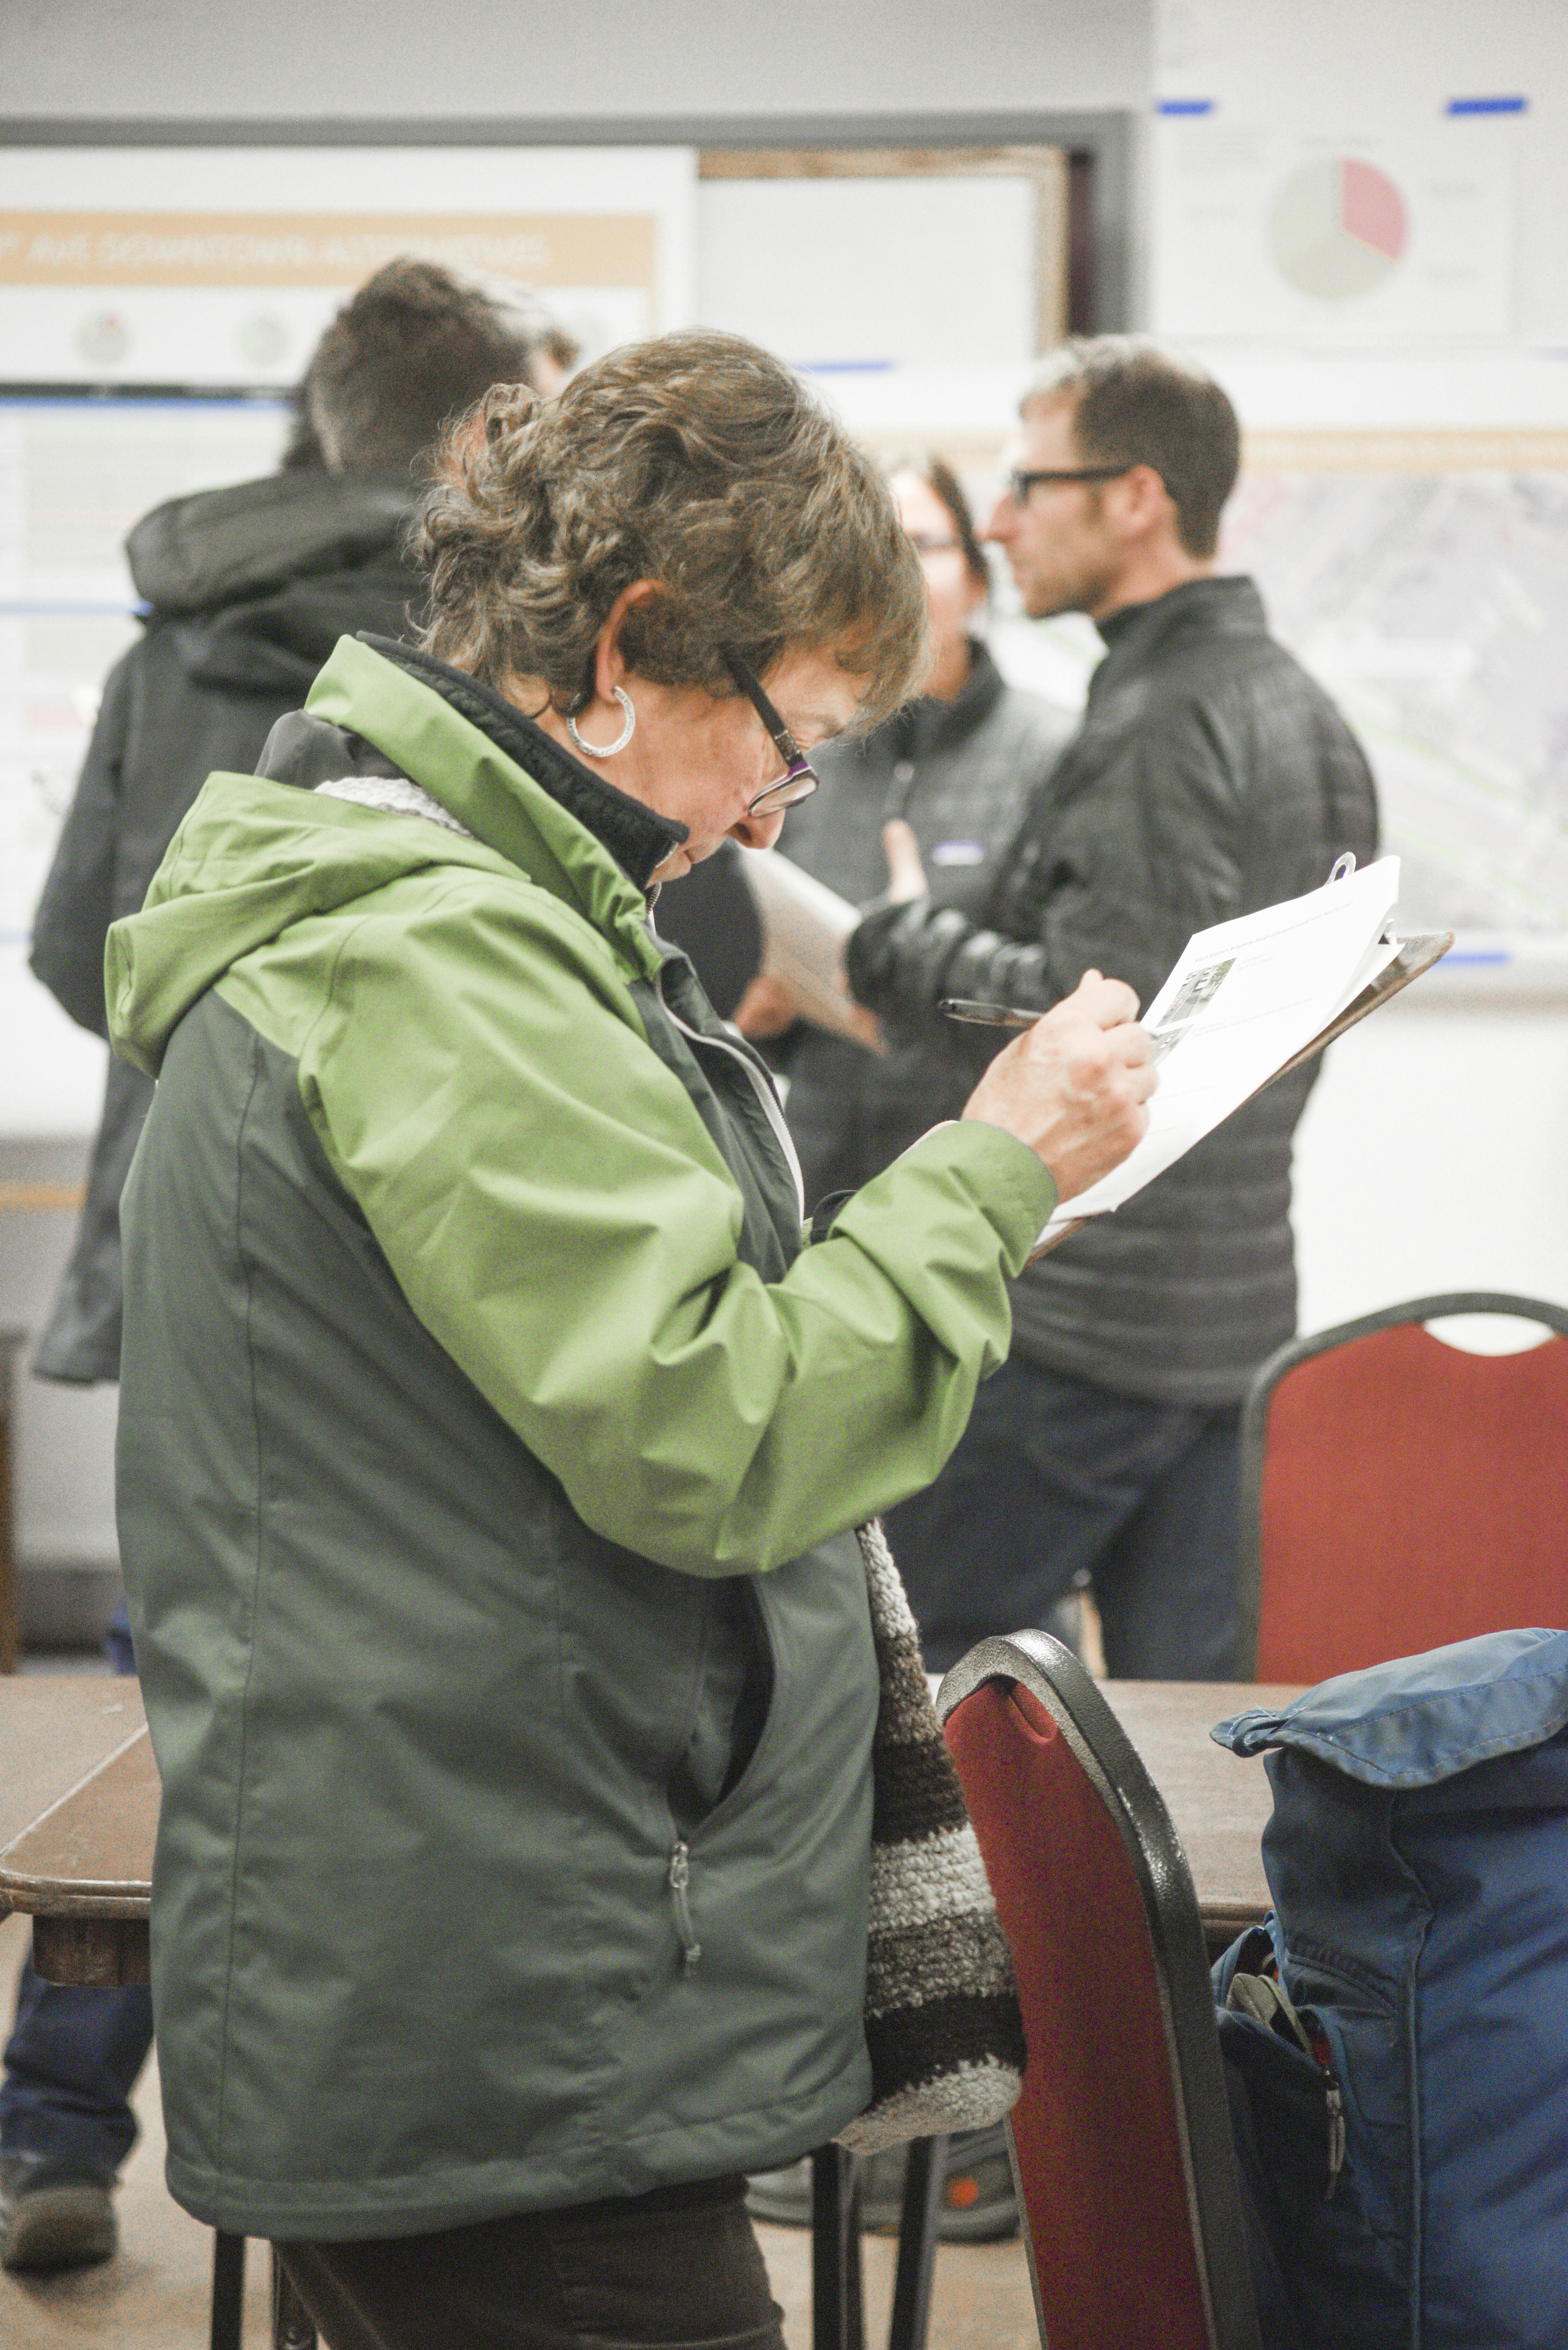 Community members learn more about the design alternatives at the Central Eugene in Motion November Open House.